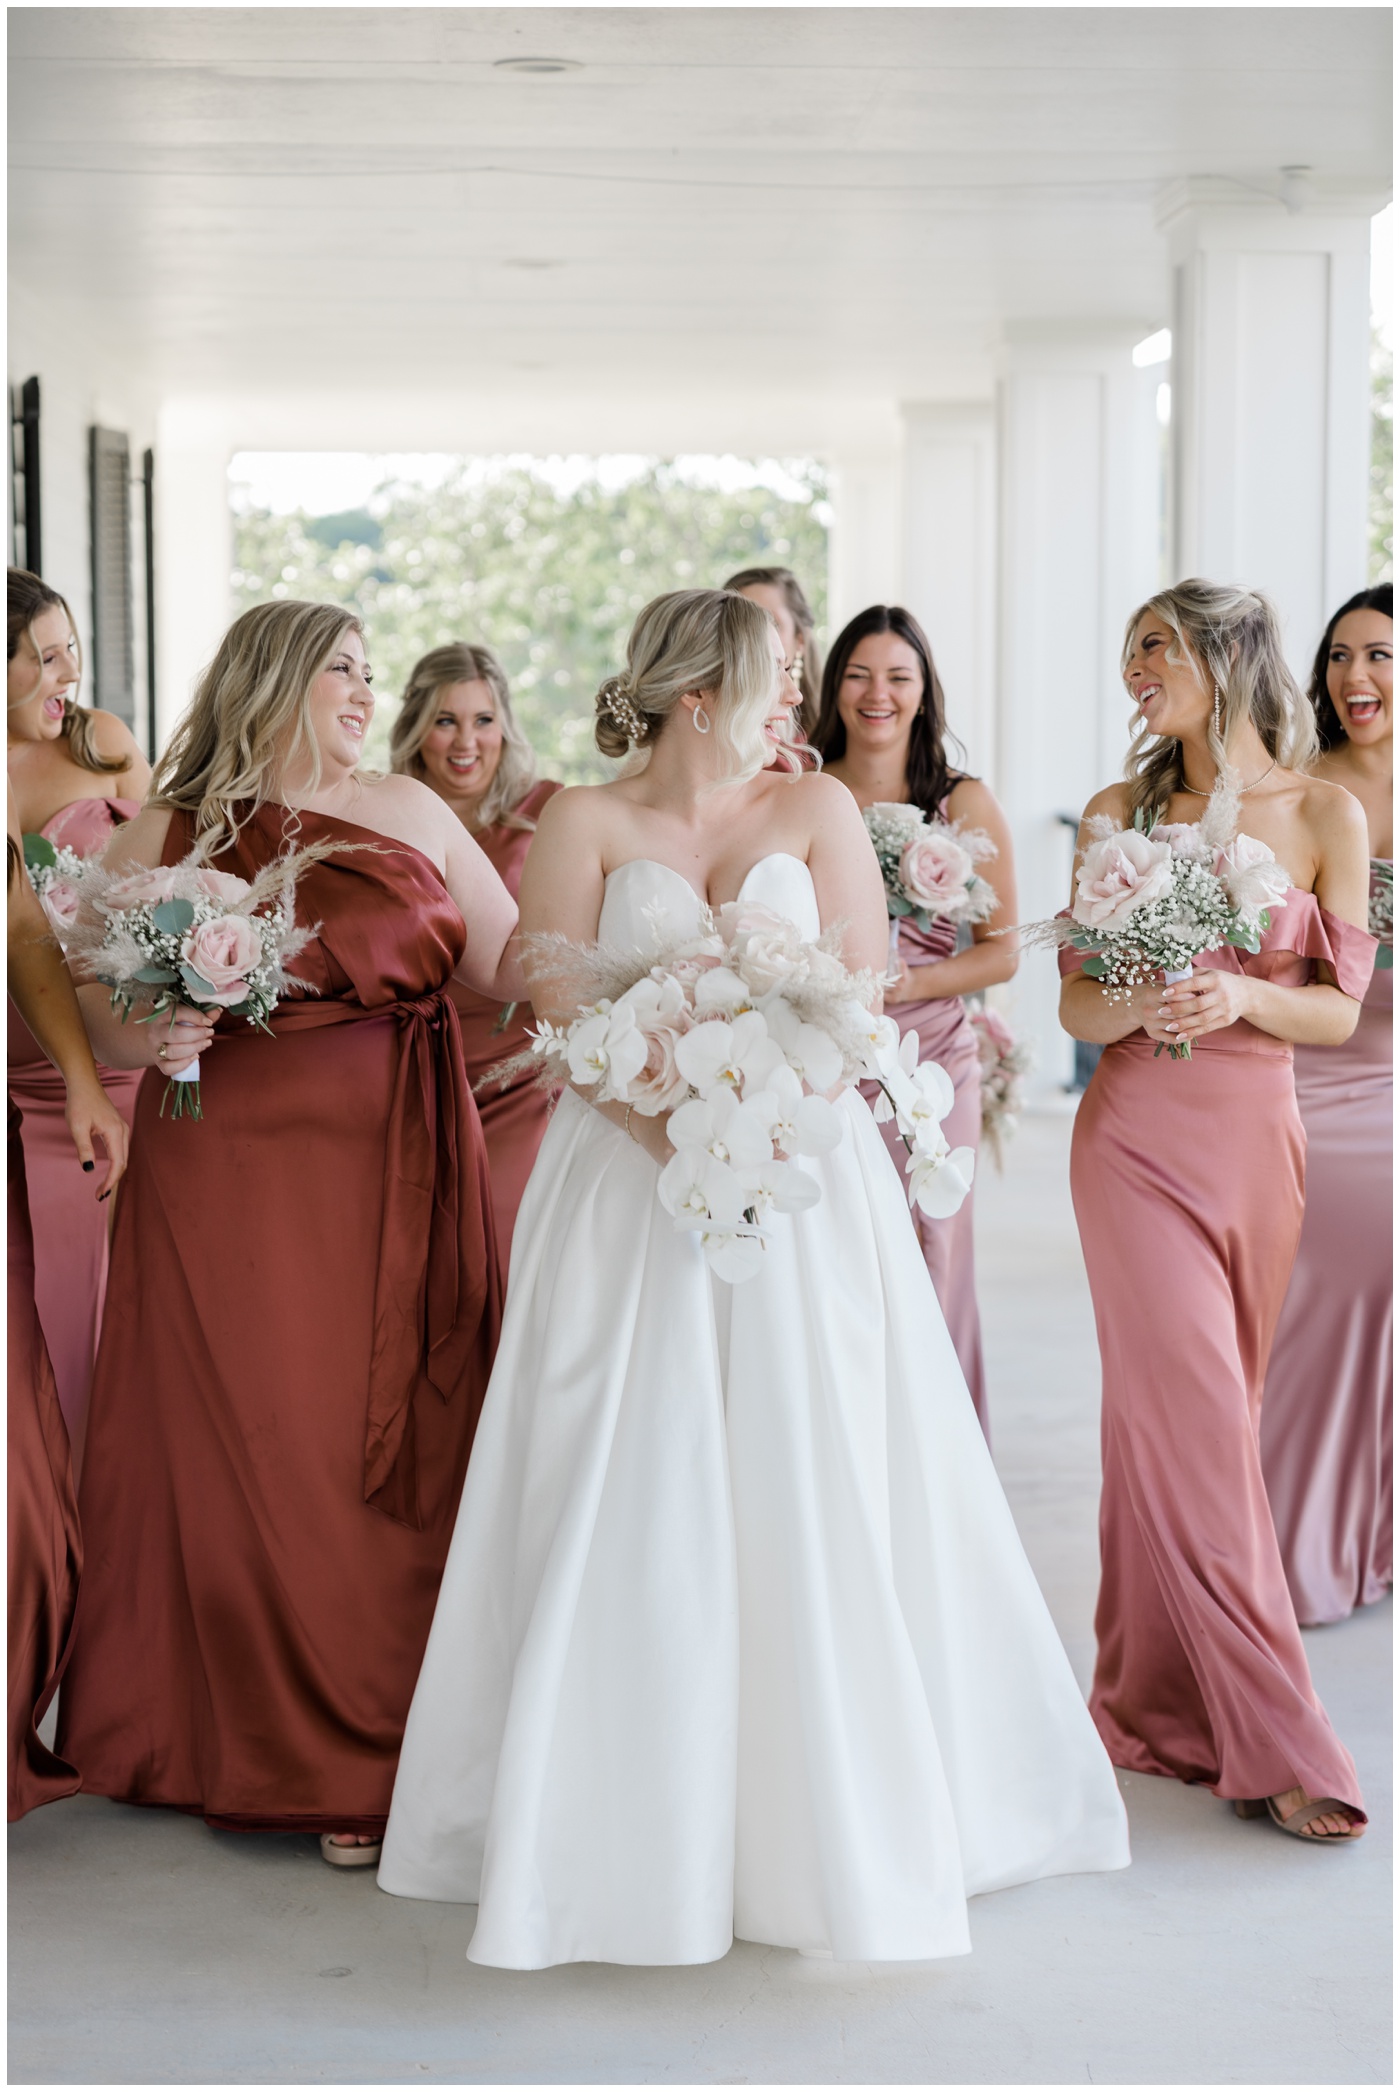 The bridesmaids cheer as they see the bride